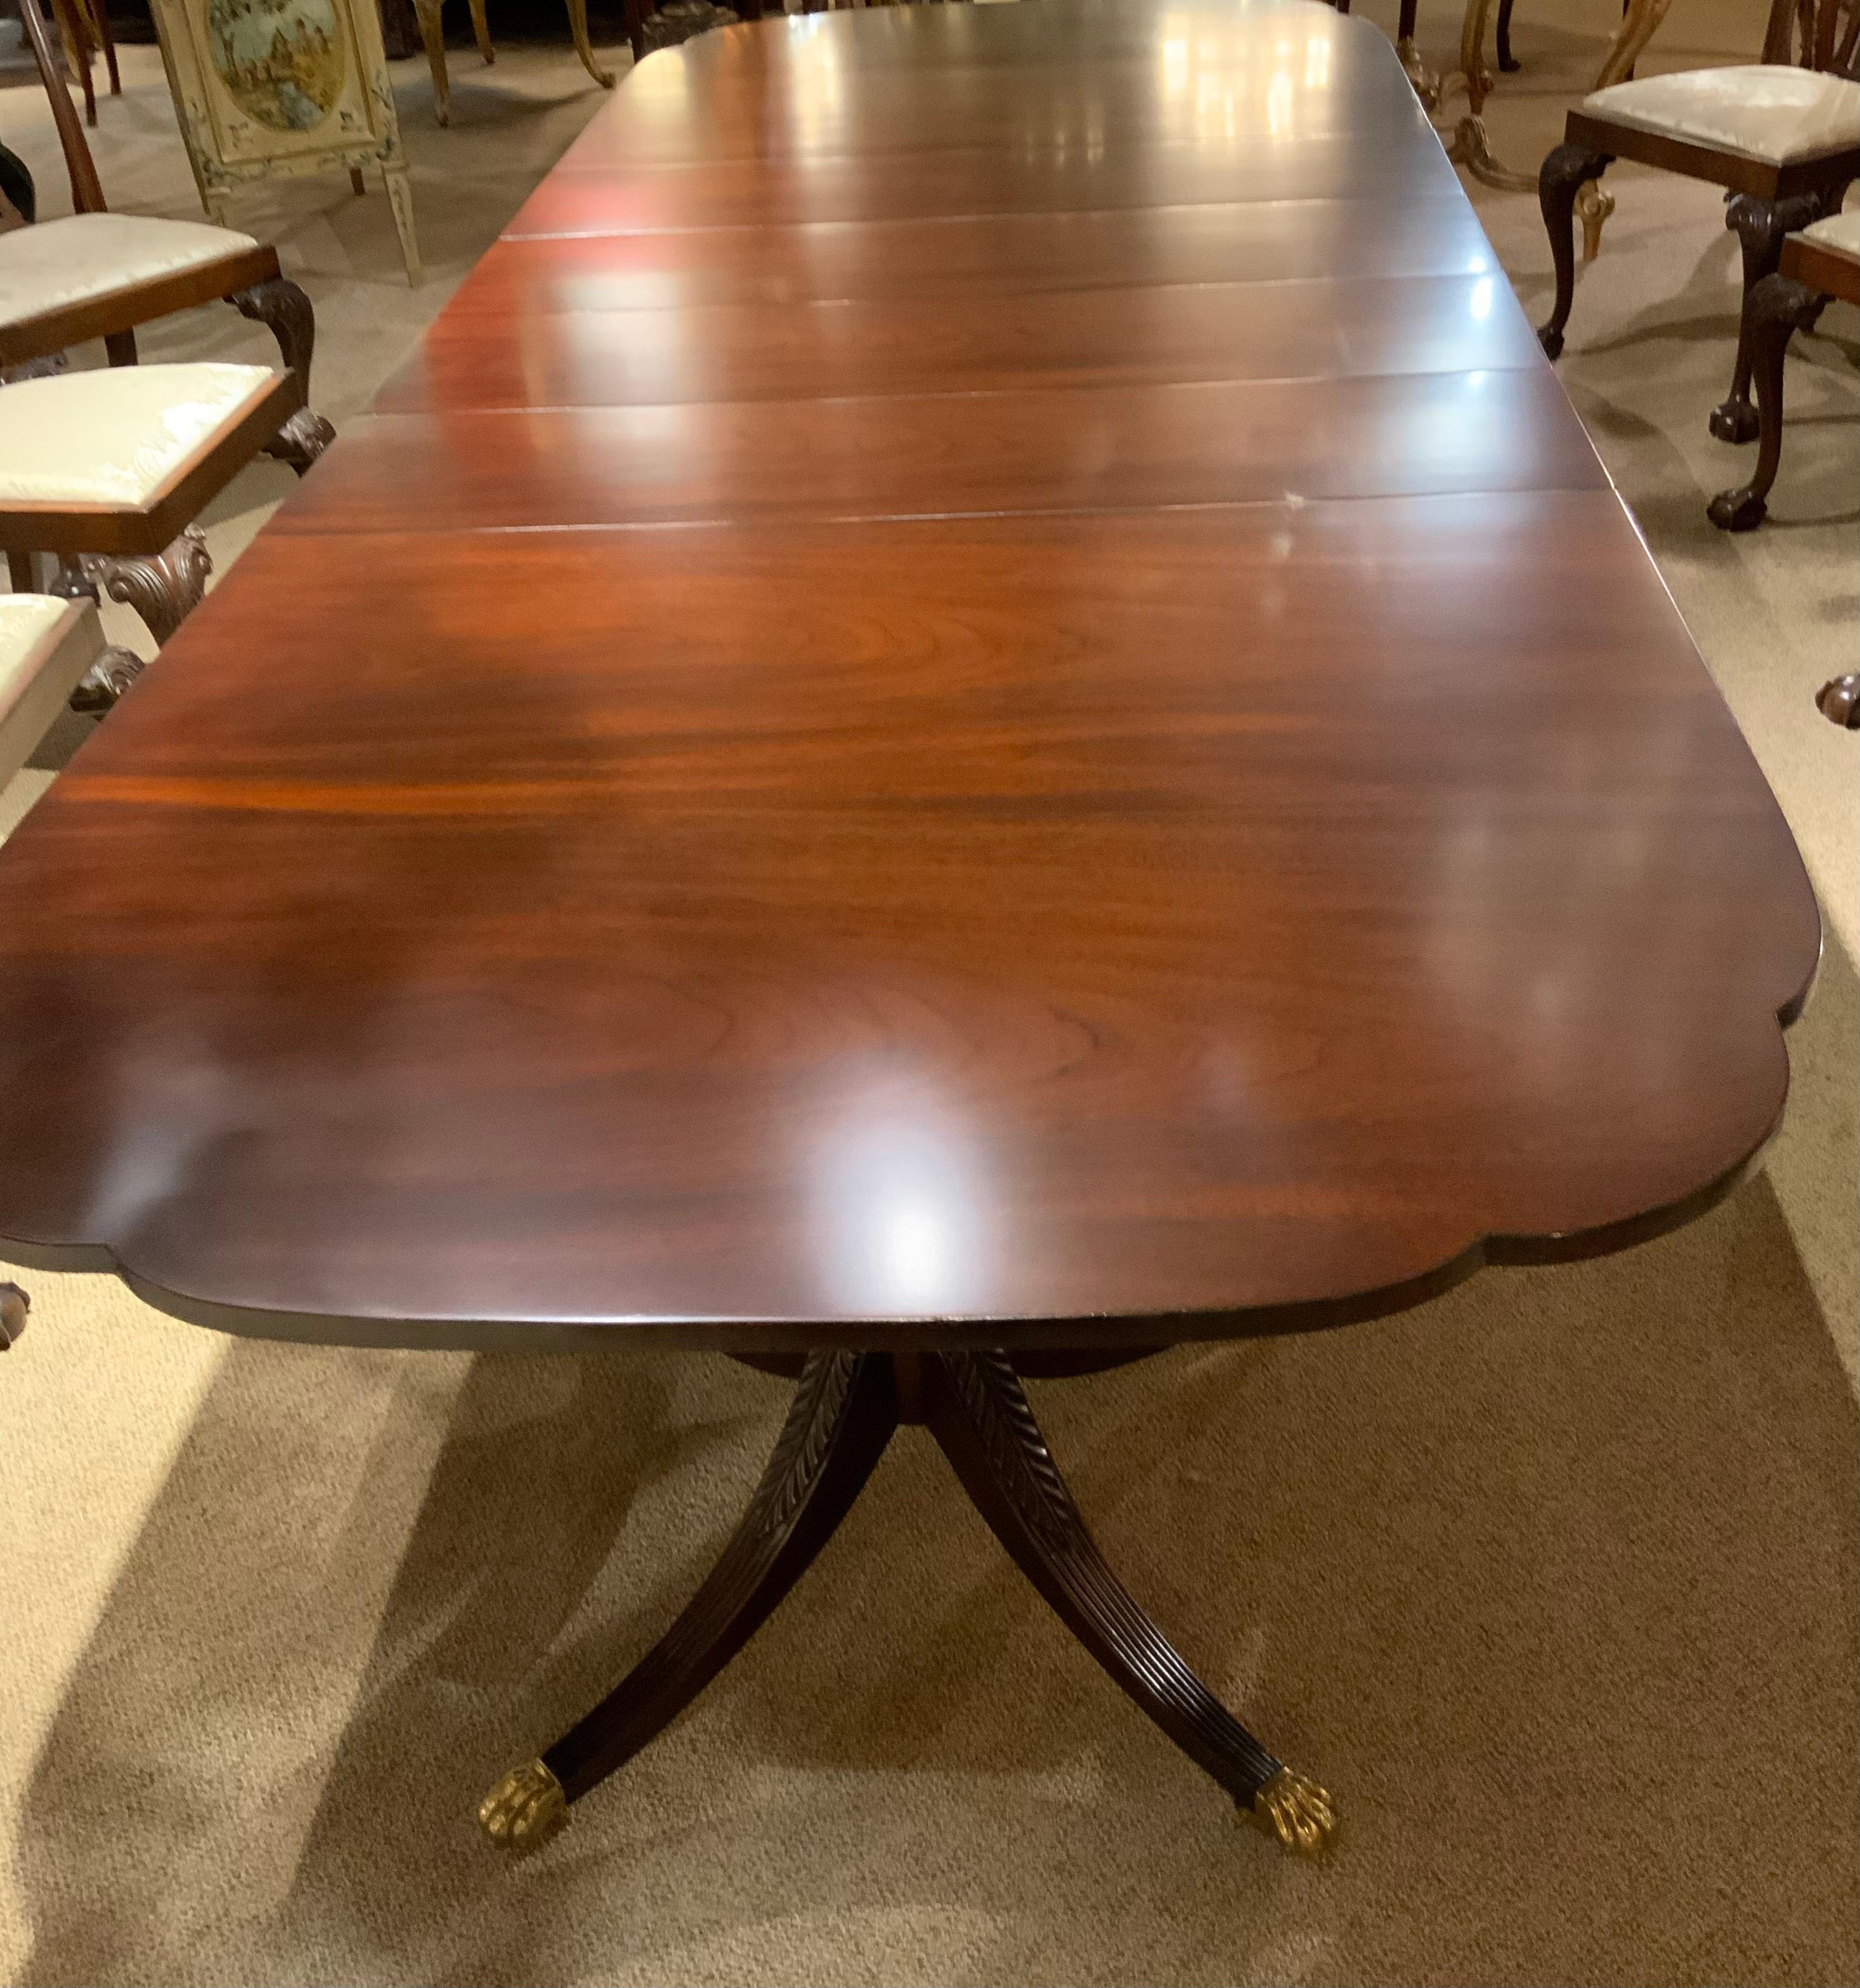 American Mahogany double pedestal george III - style dining table with four leaves